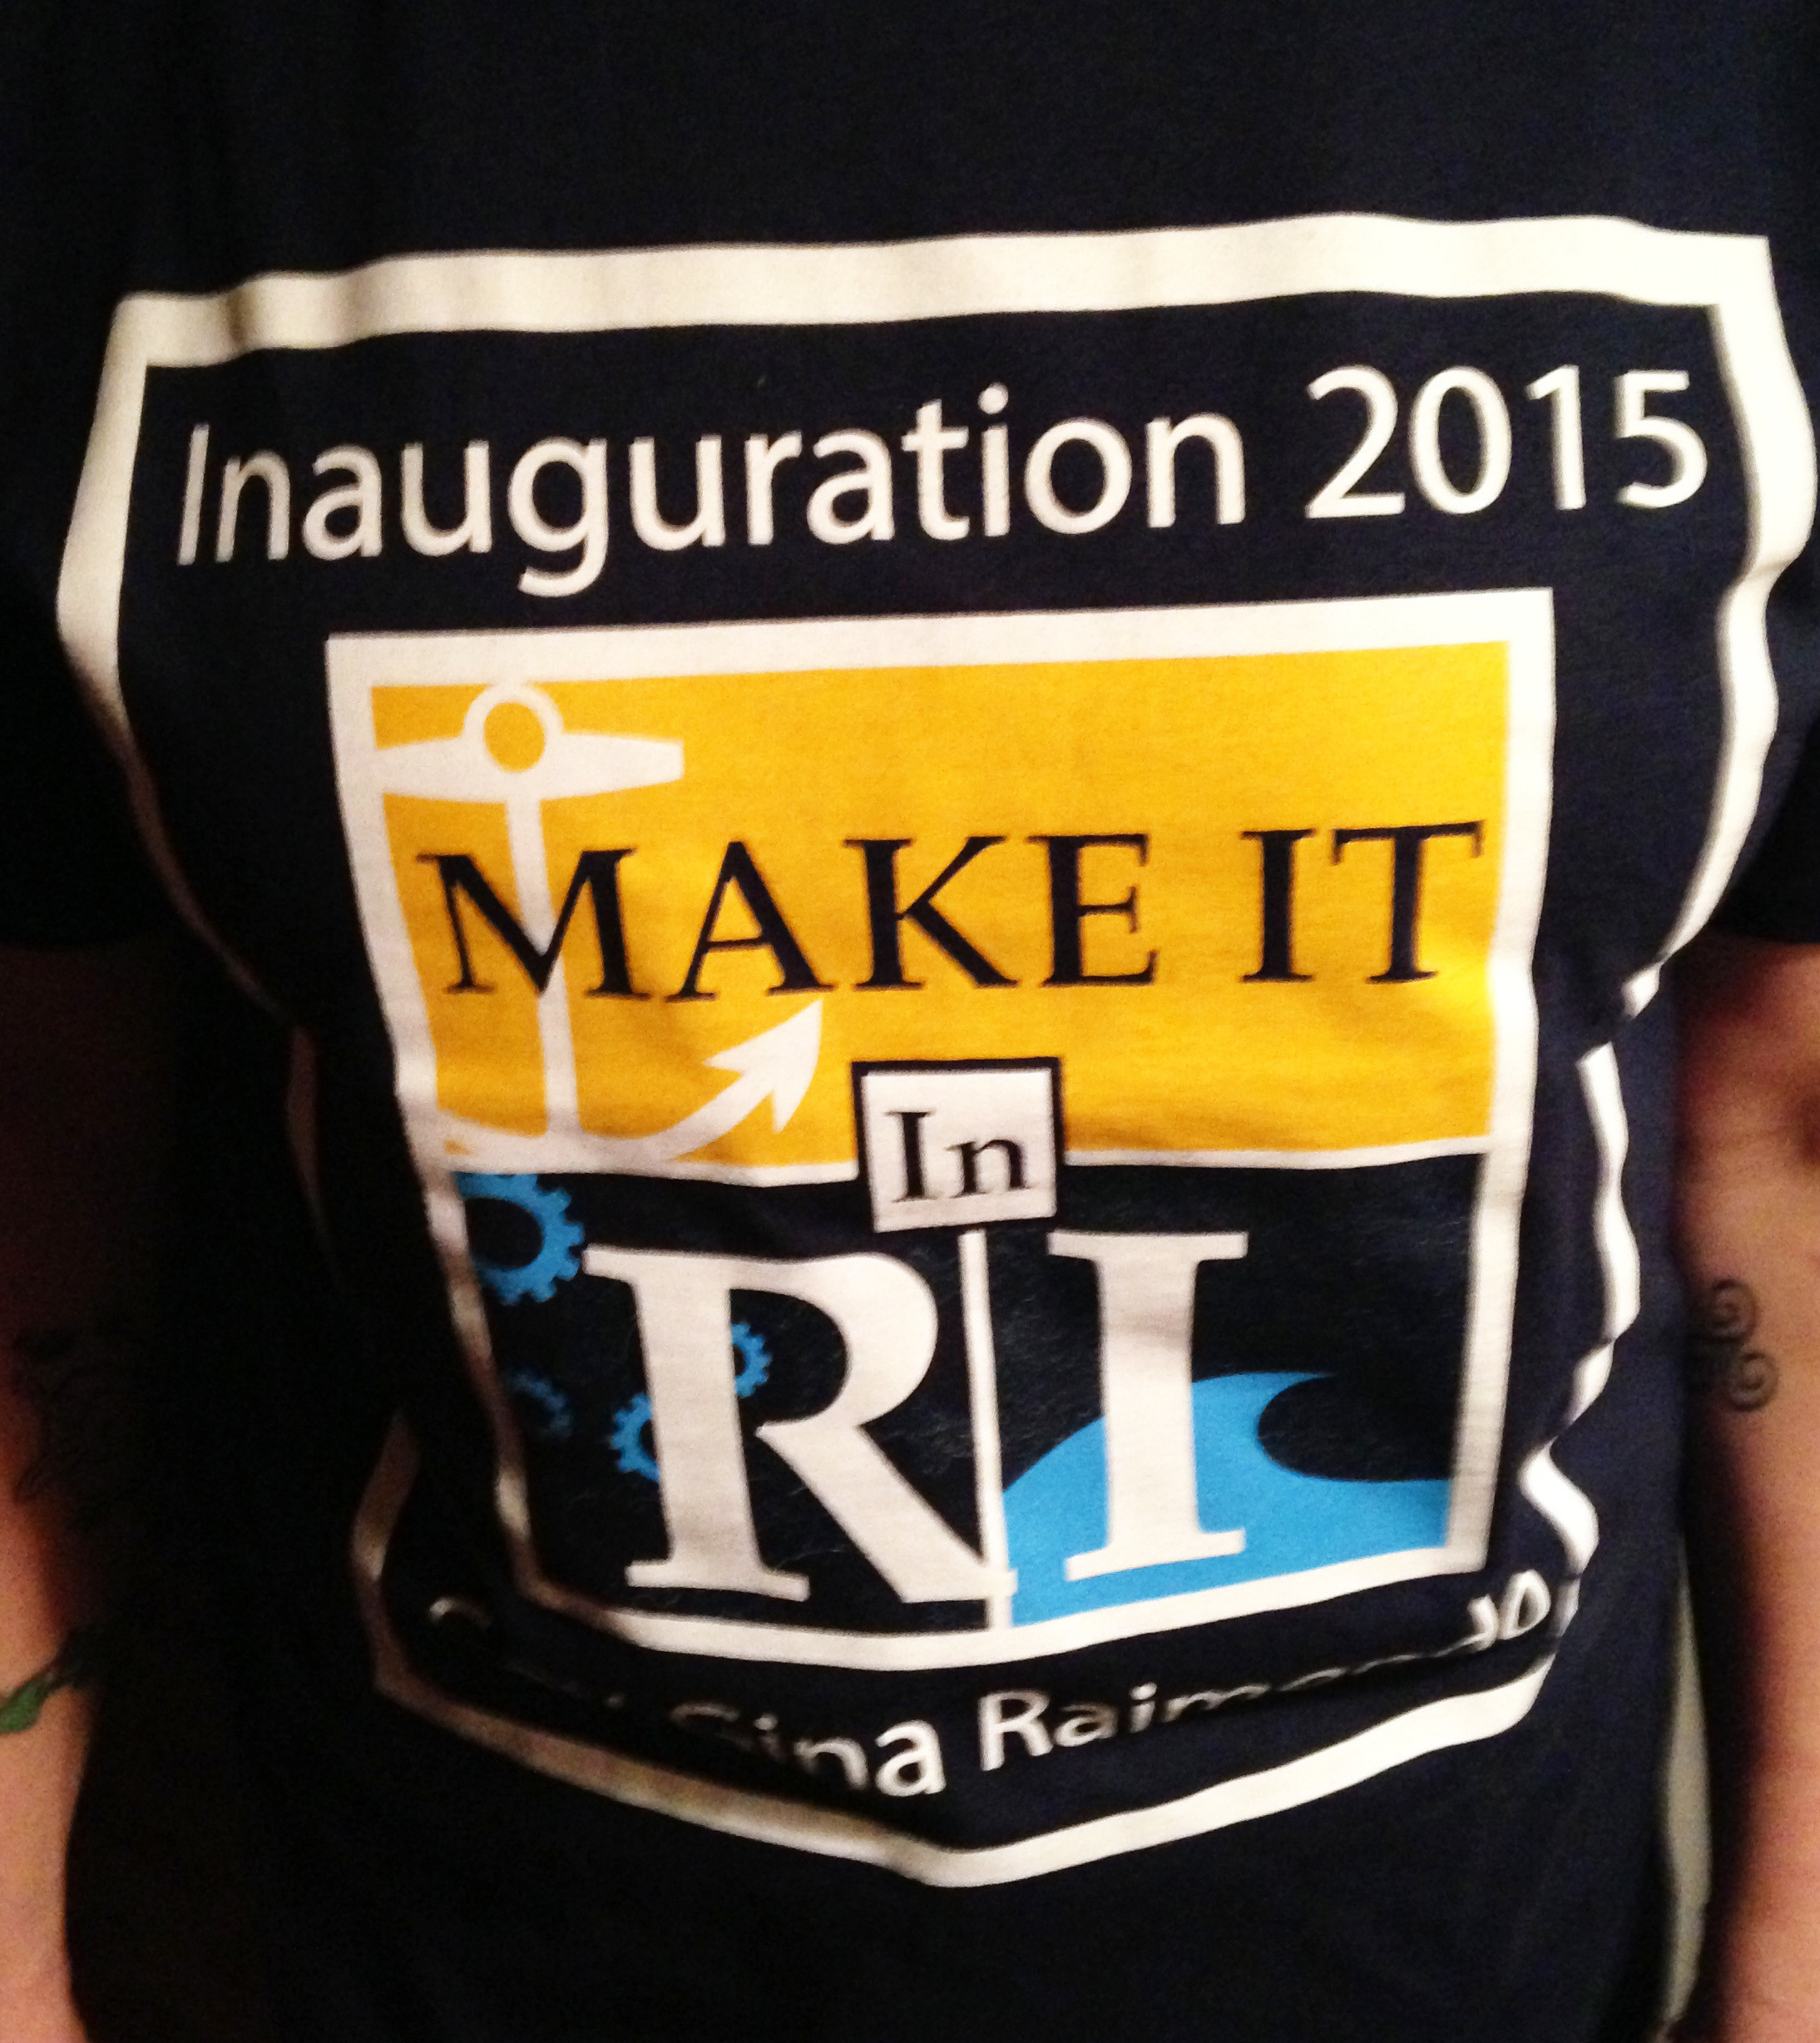 The free shirts handed out at Gov. Gina Raimondo's inauguration celebration on Jan. 6, featuring the new marketing slogan, Make It in RI. A similar slogan had been used by Gov. Edward King of Massachusetts in the early 1980s, "Make It In Massachusetts."